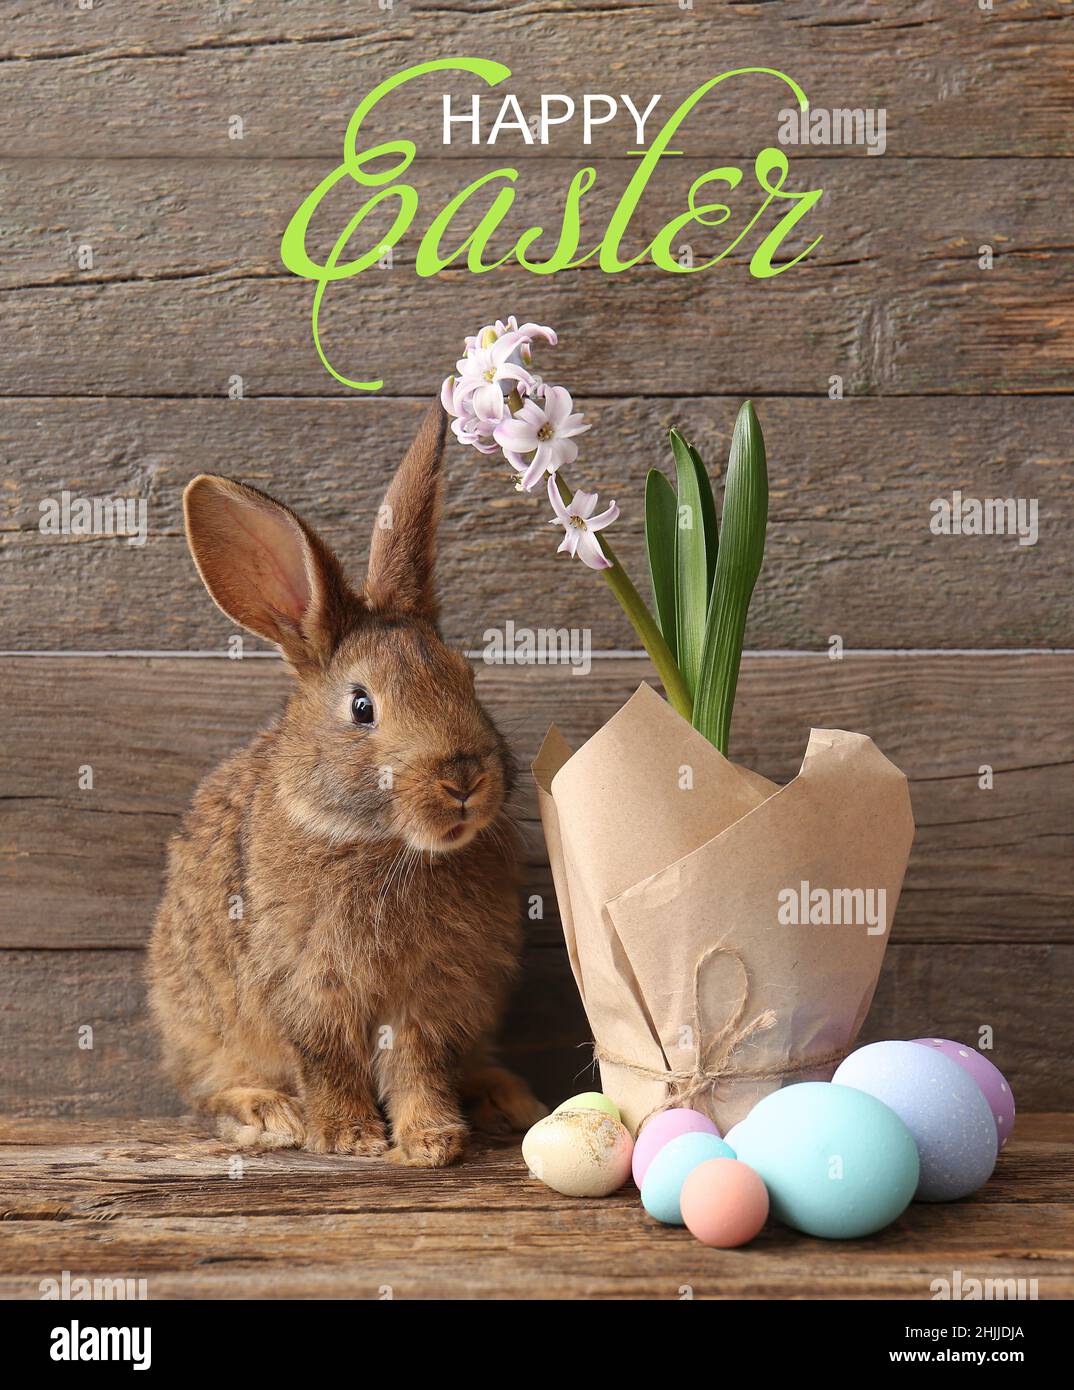 Beautiful greeting card for Happy Easter with cute rabbit and eggs Stock Photo - Alamy